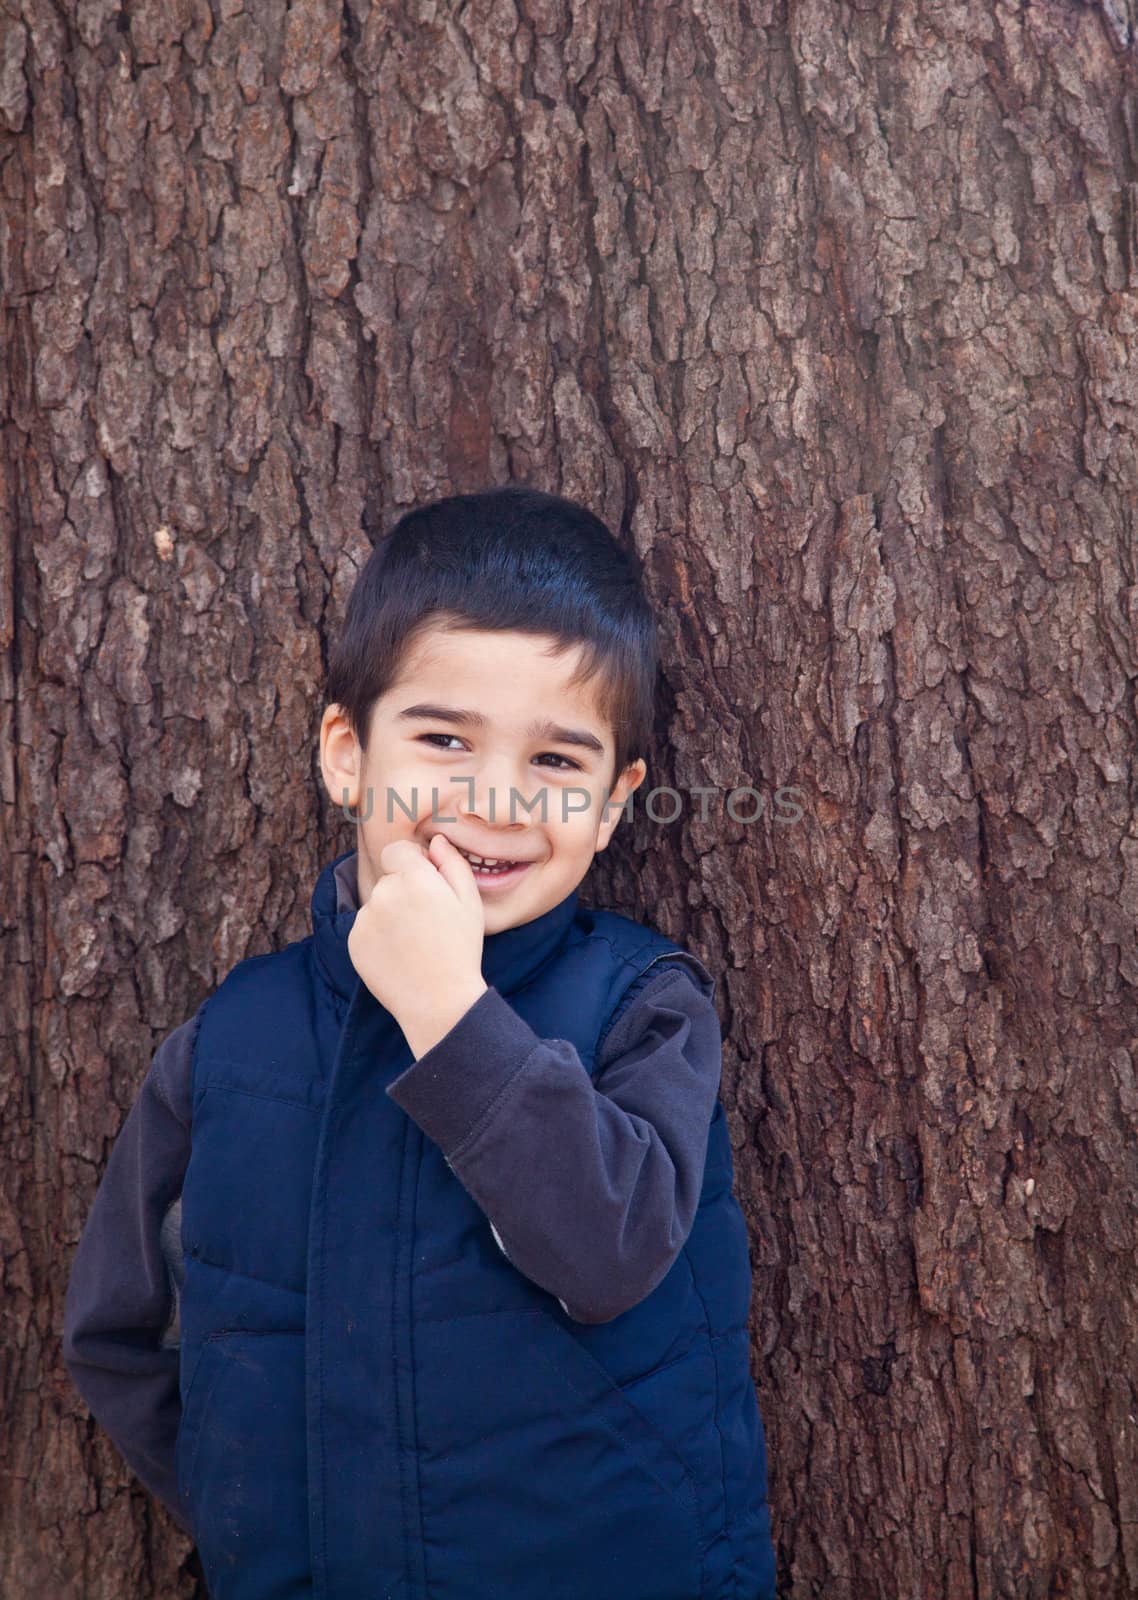 Little boy looking to the left in front of a tree with bark texture in the background biting on his finger with a shy expression.